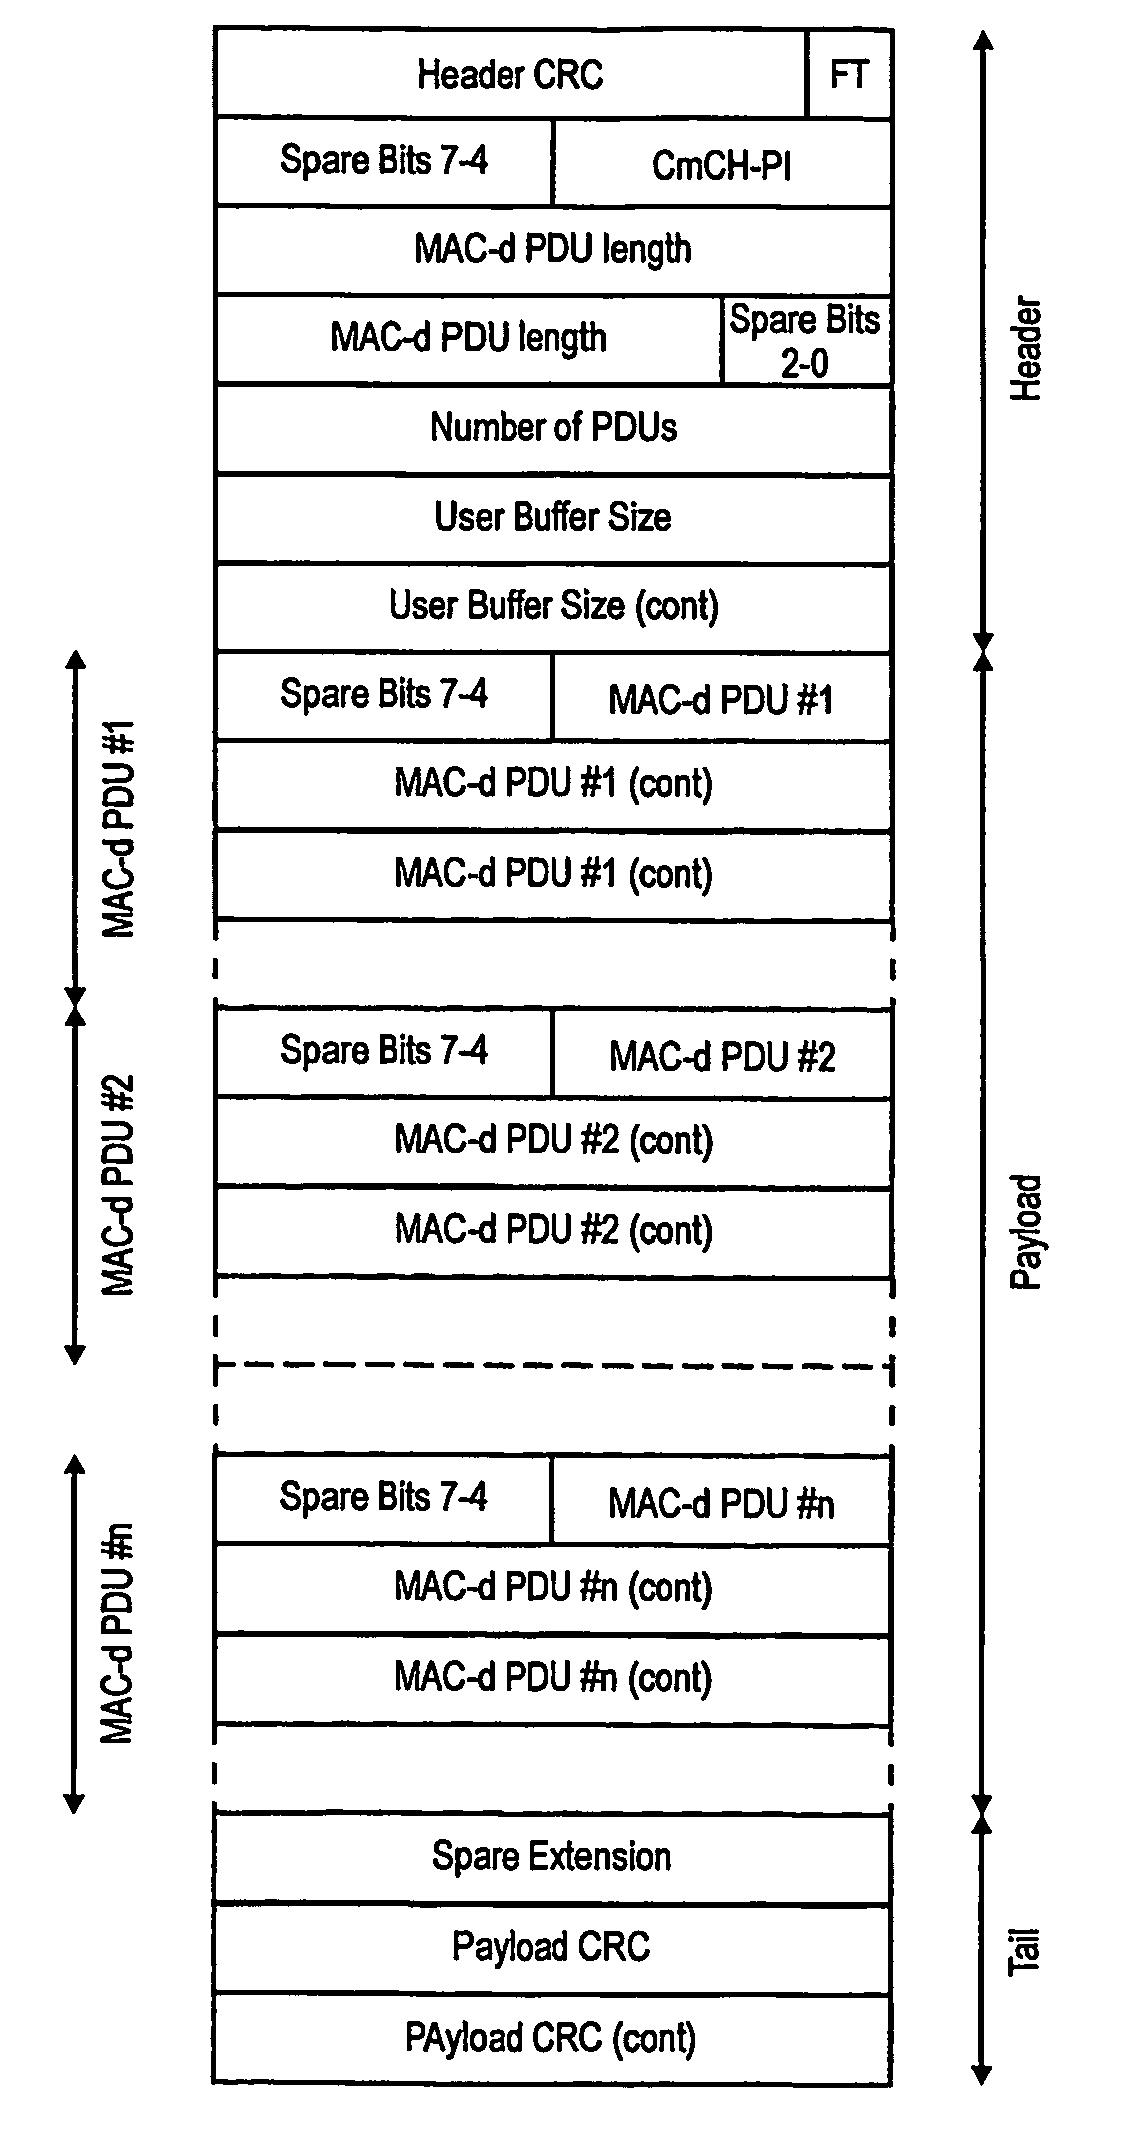 Protocol context transfer in a mobile communication system